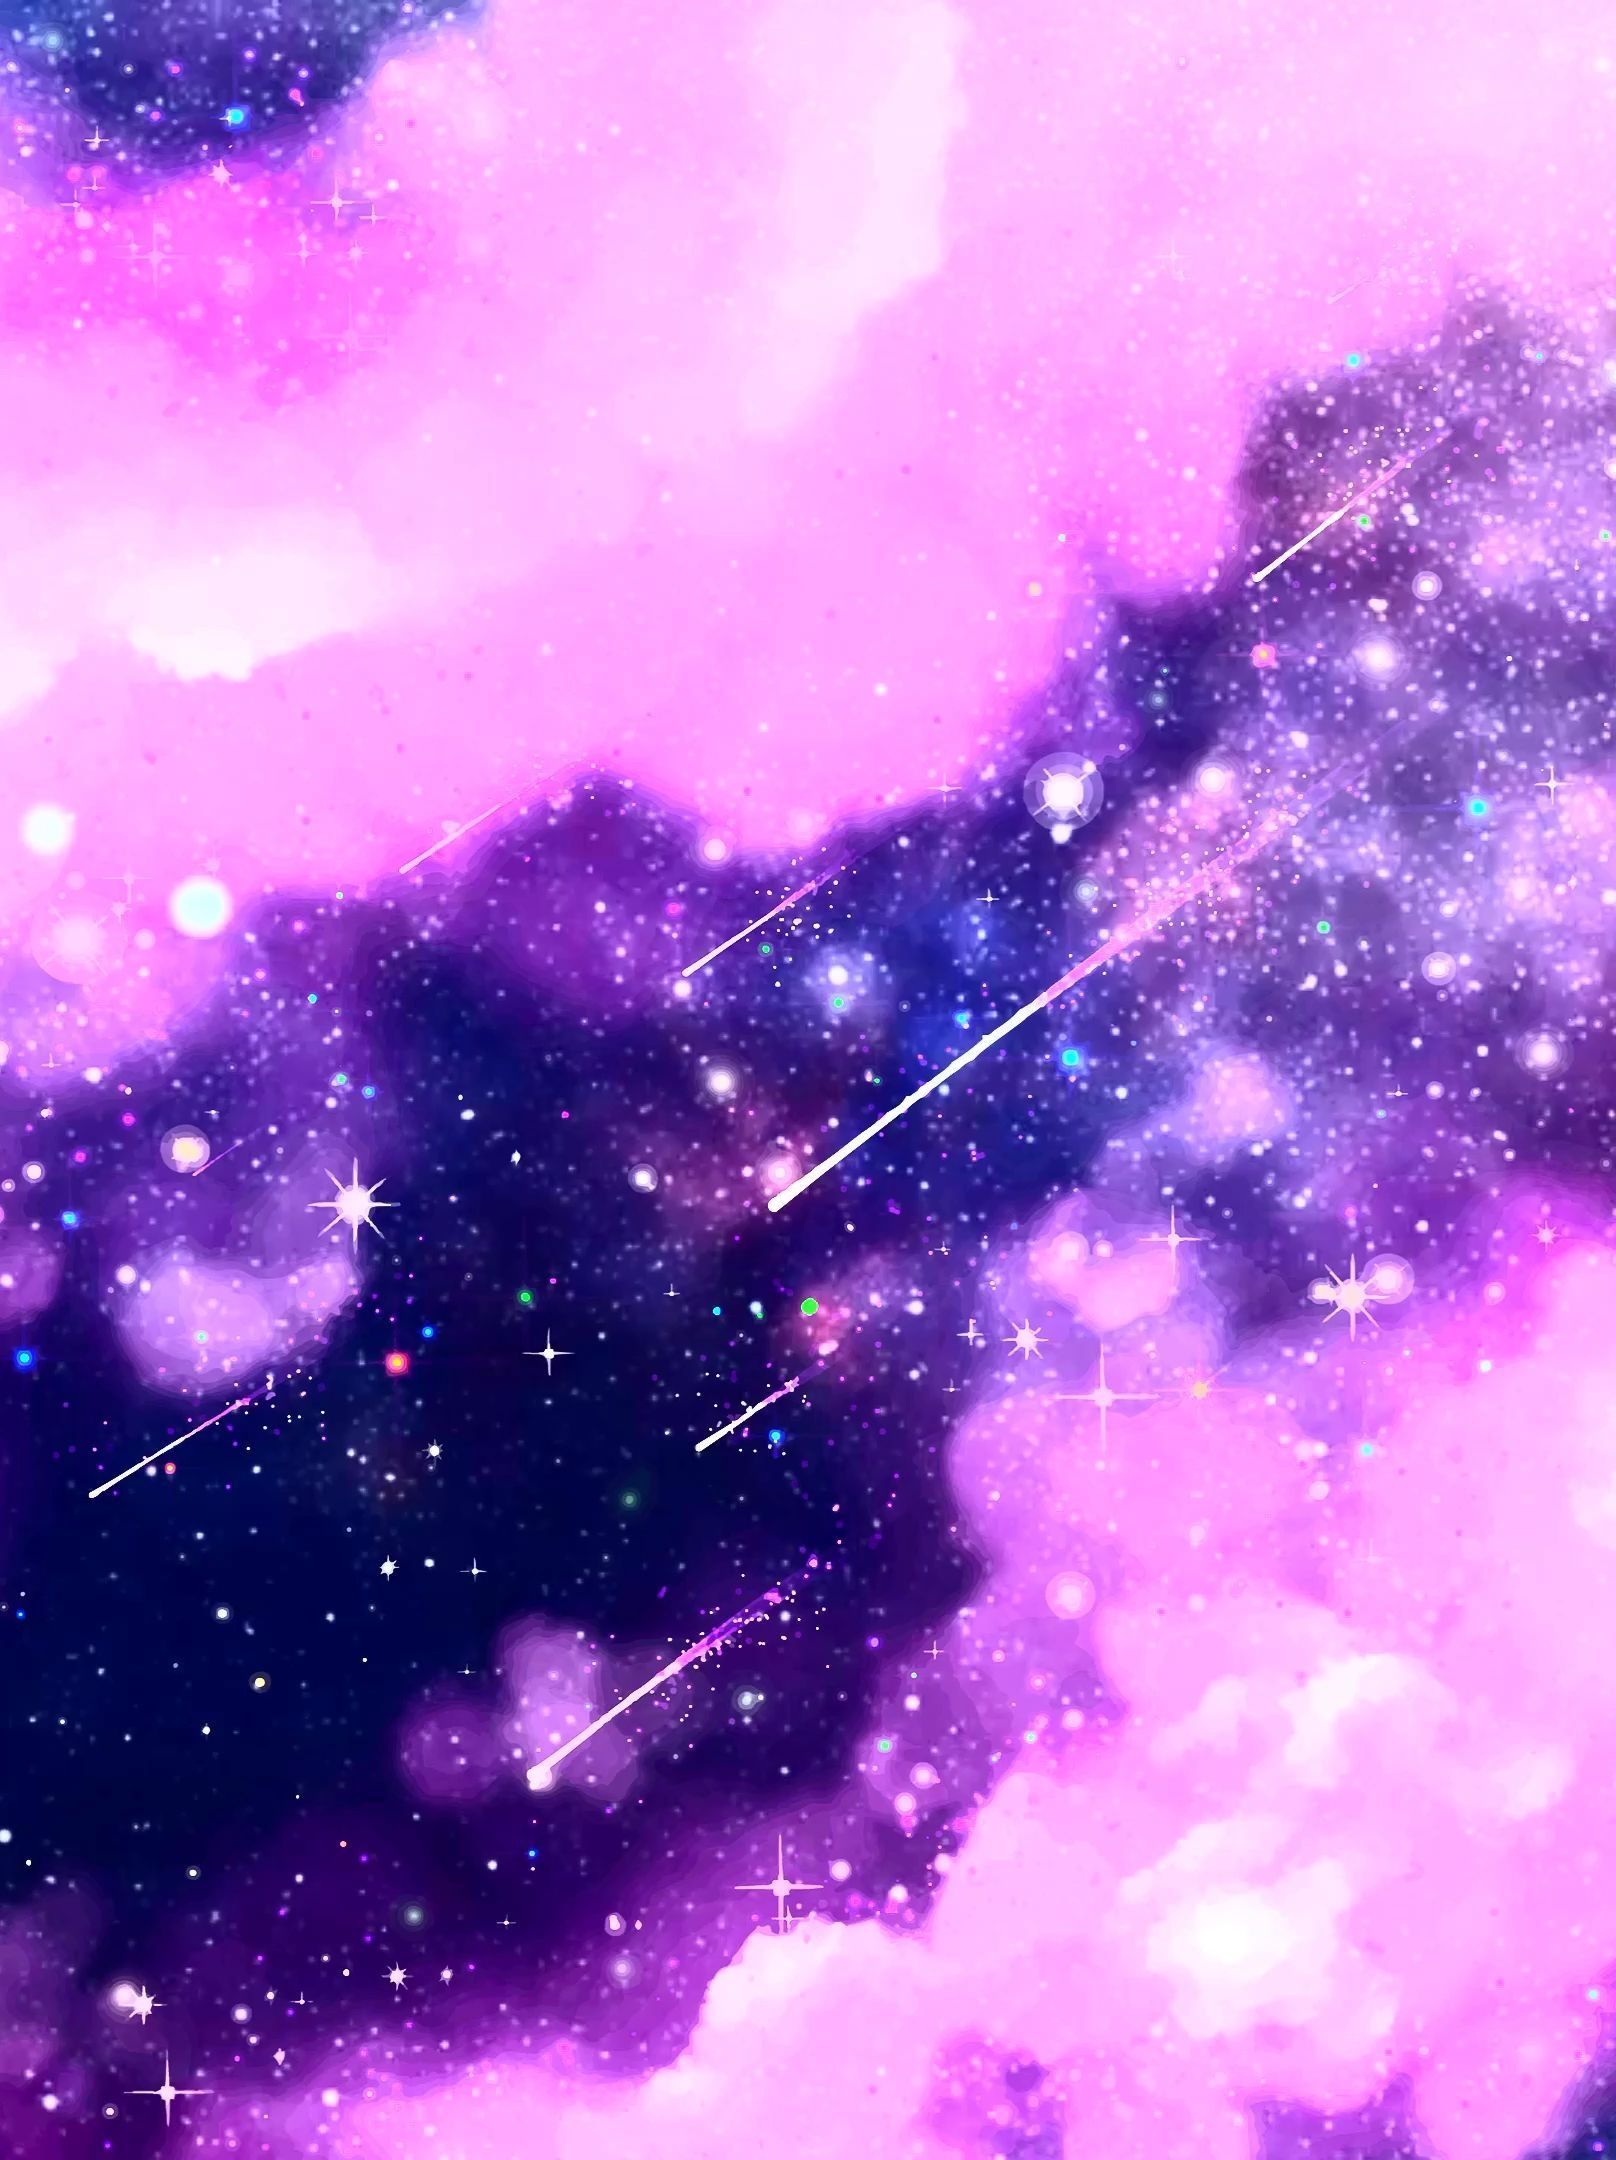 A purple and pink galaxy with shooting stars - Space, galaxy